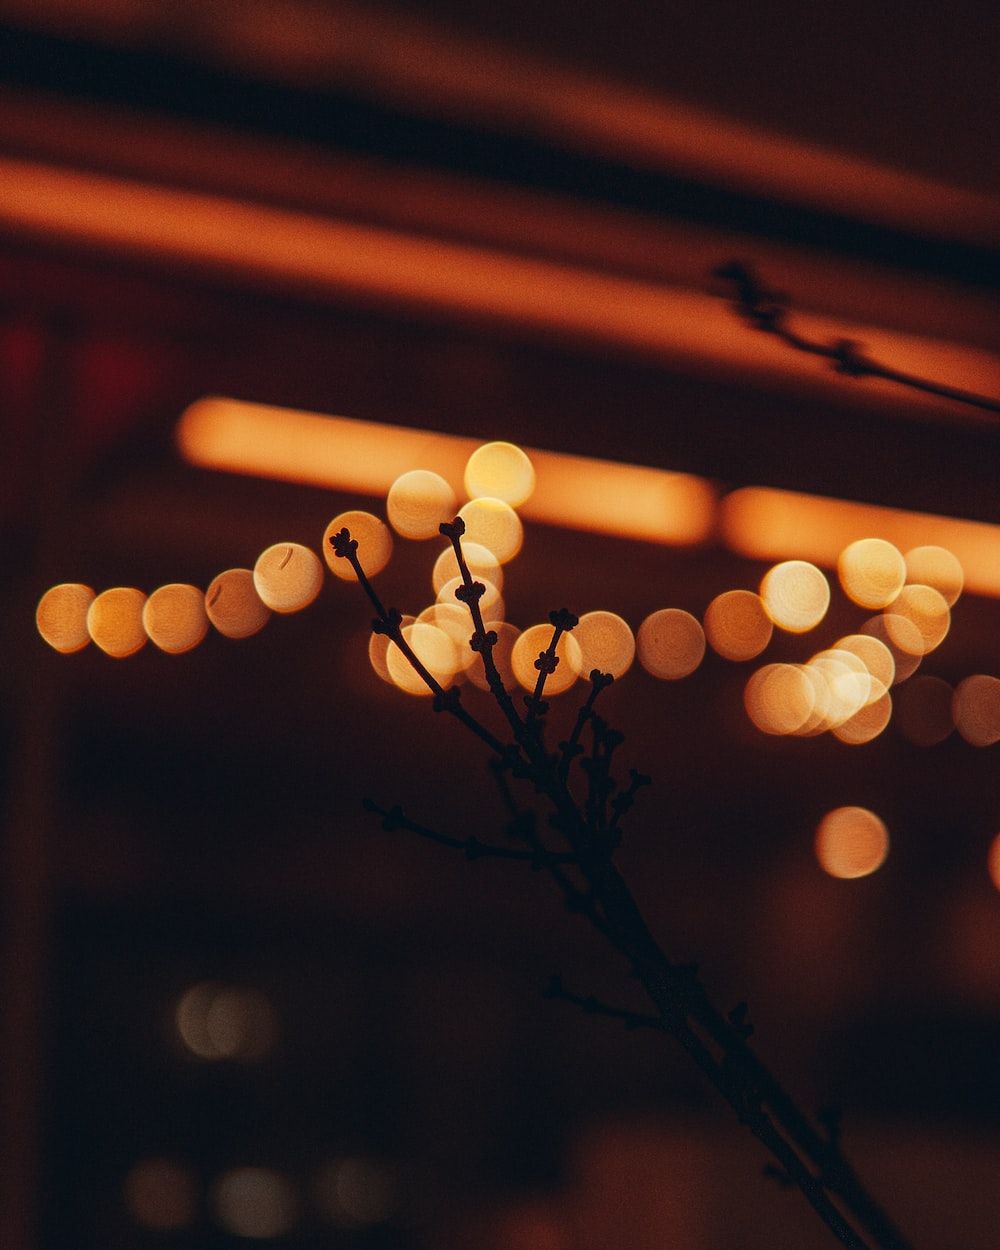 A plant with small yellow flowers in front of a blurred background of lights. - Blurry